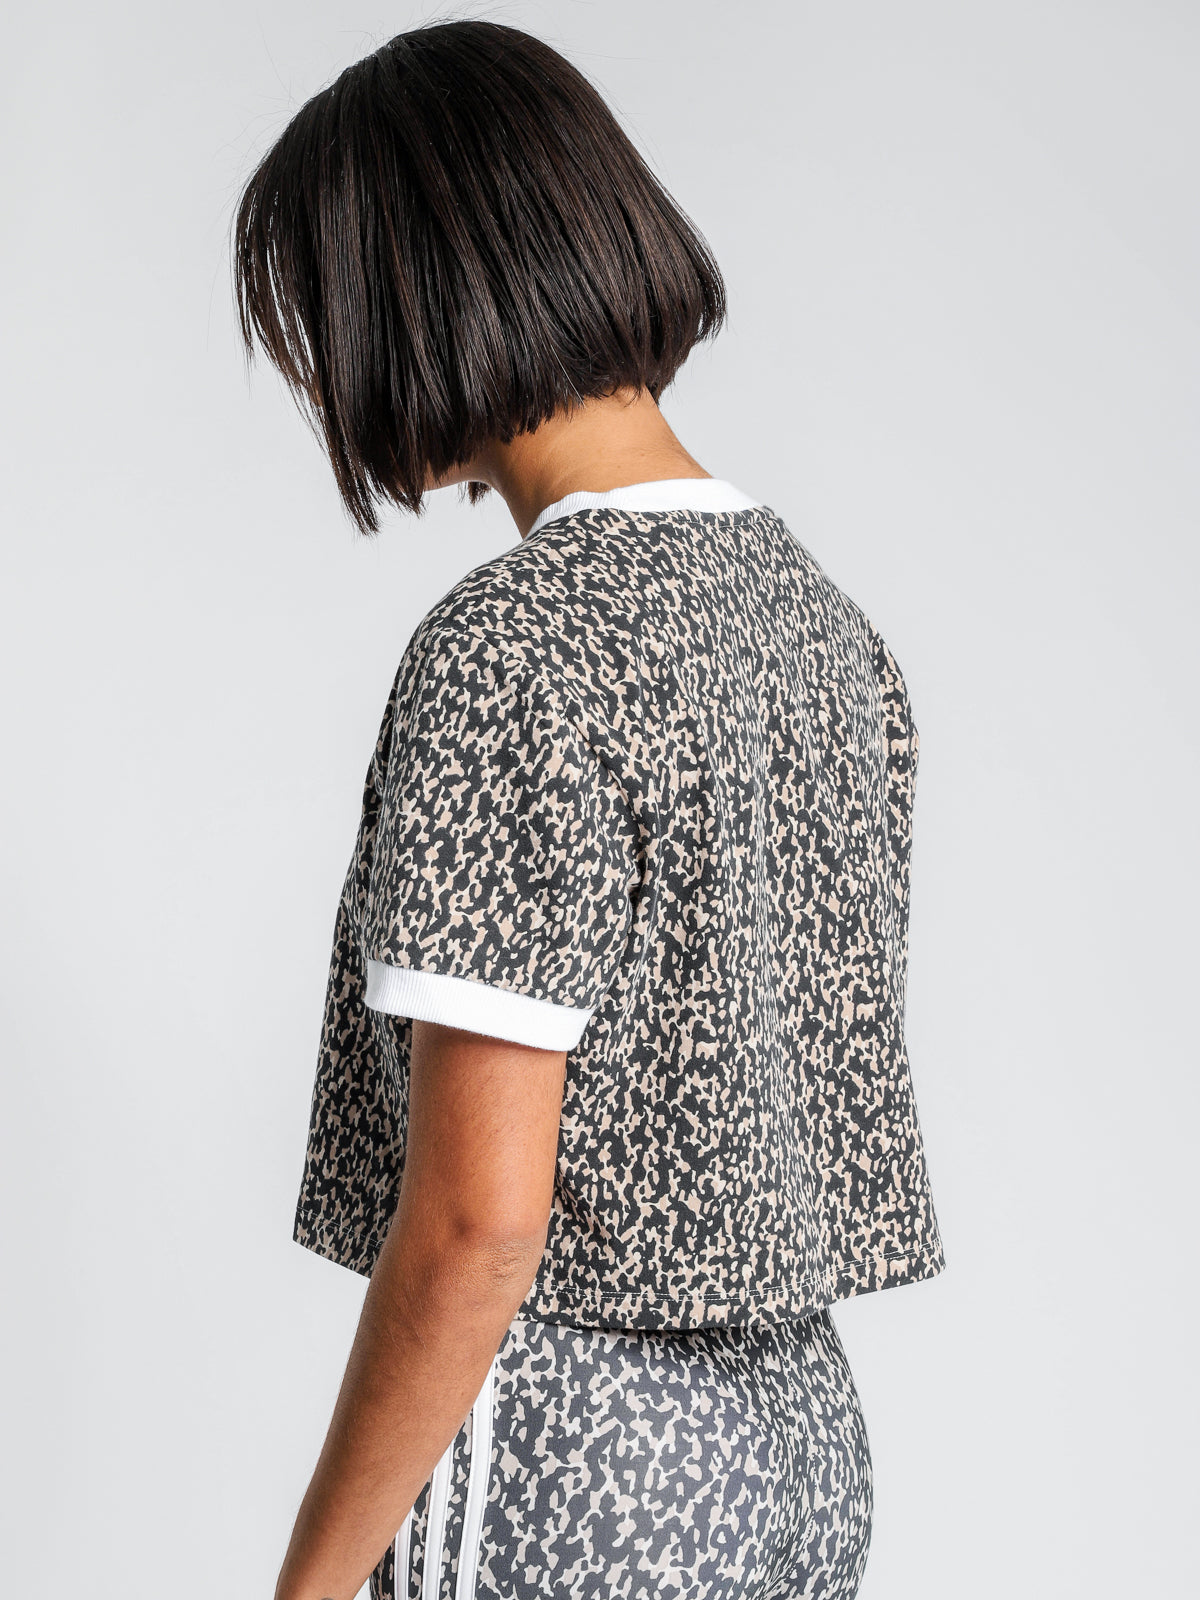 Leoflage Cropped T-Shirt in Leopard Camouflage Print